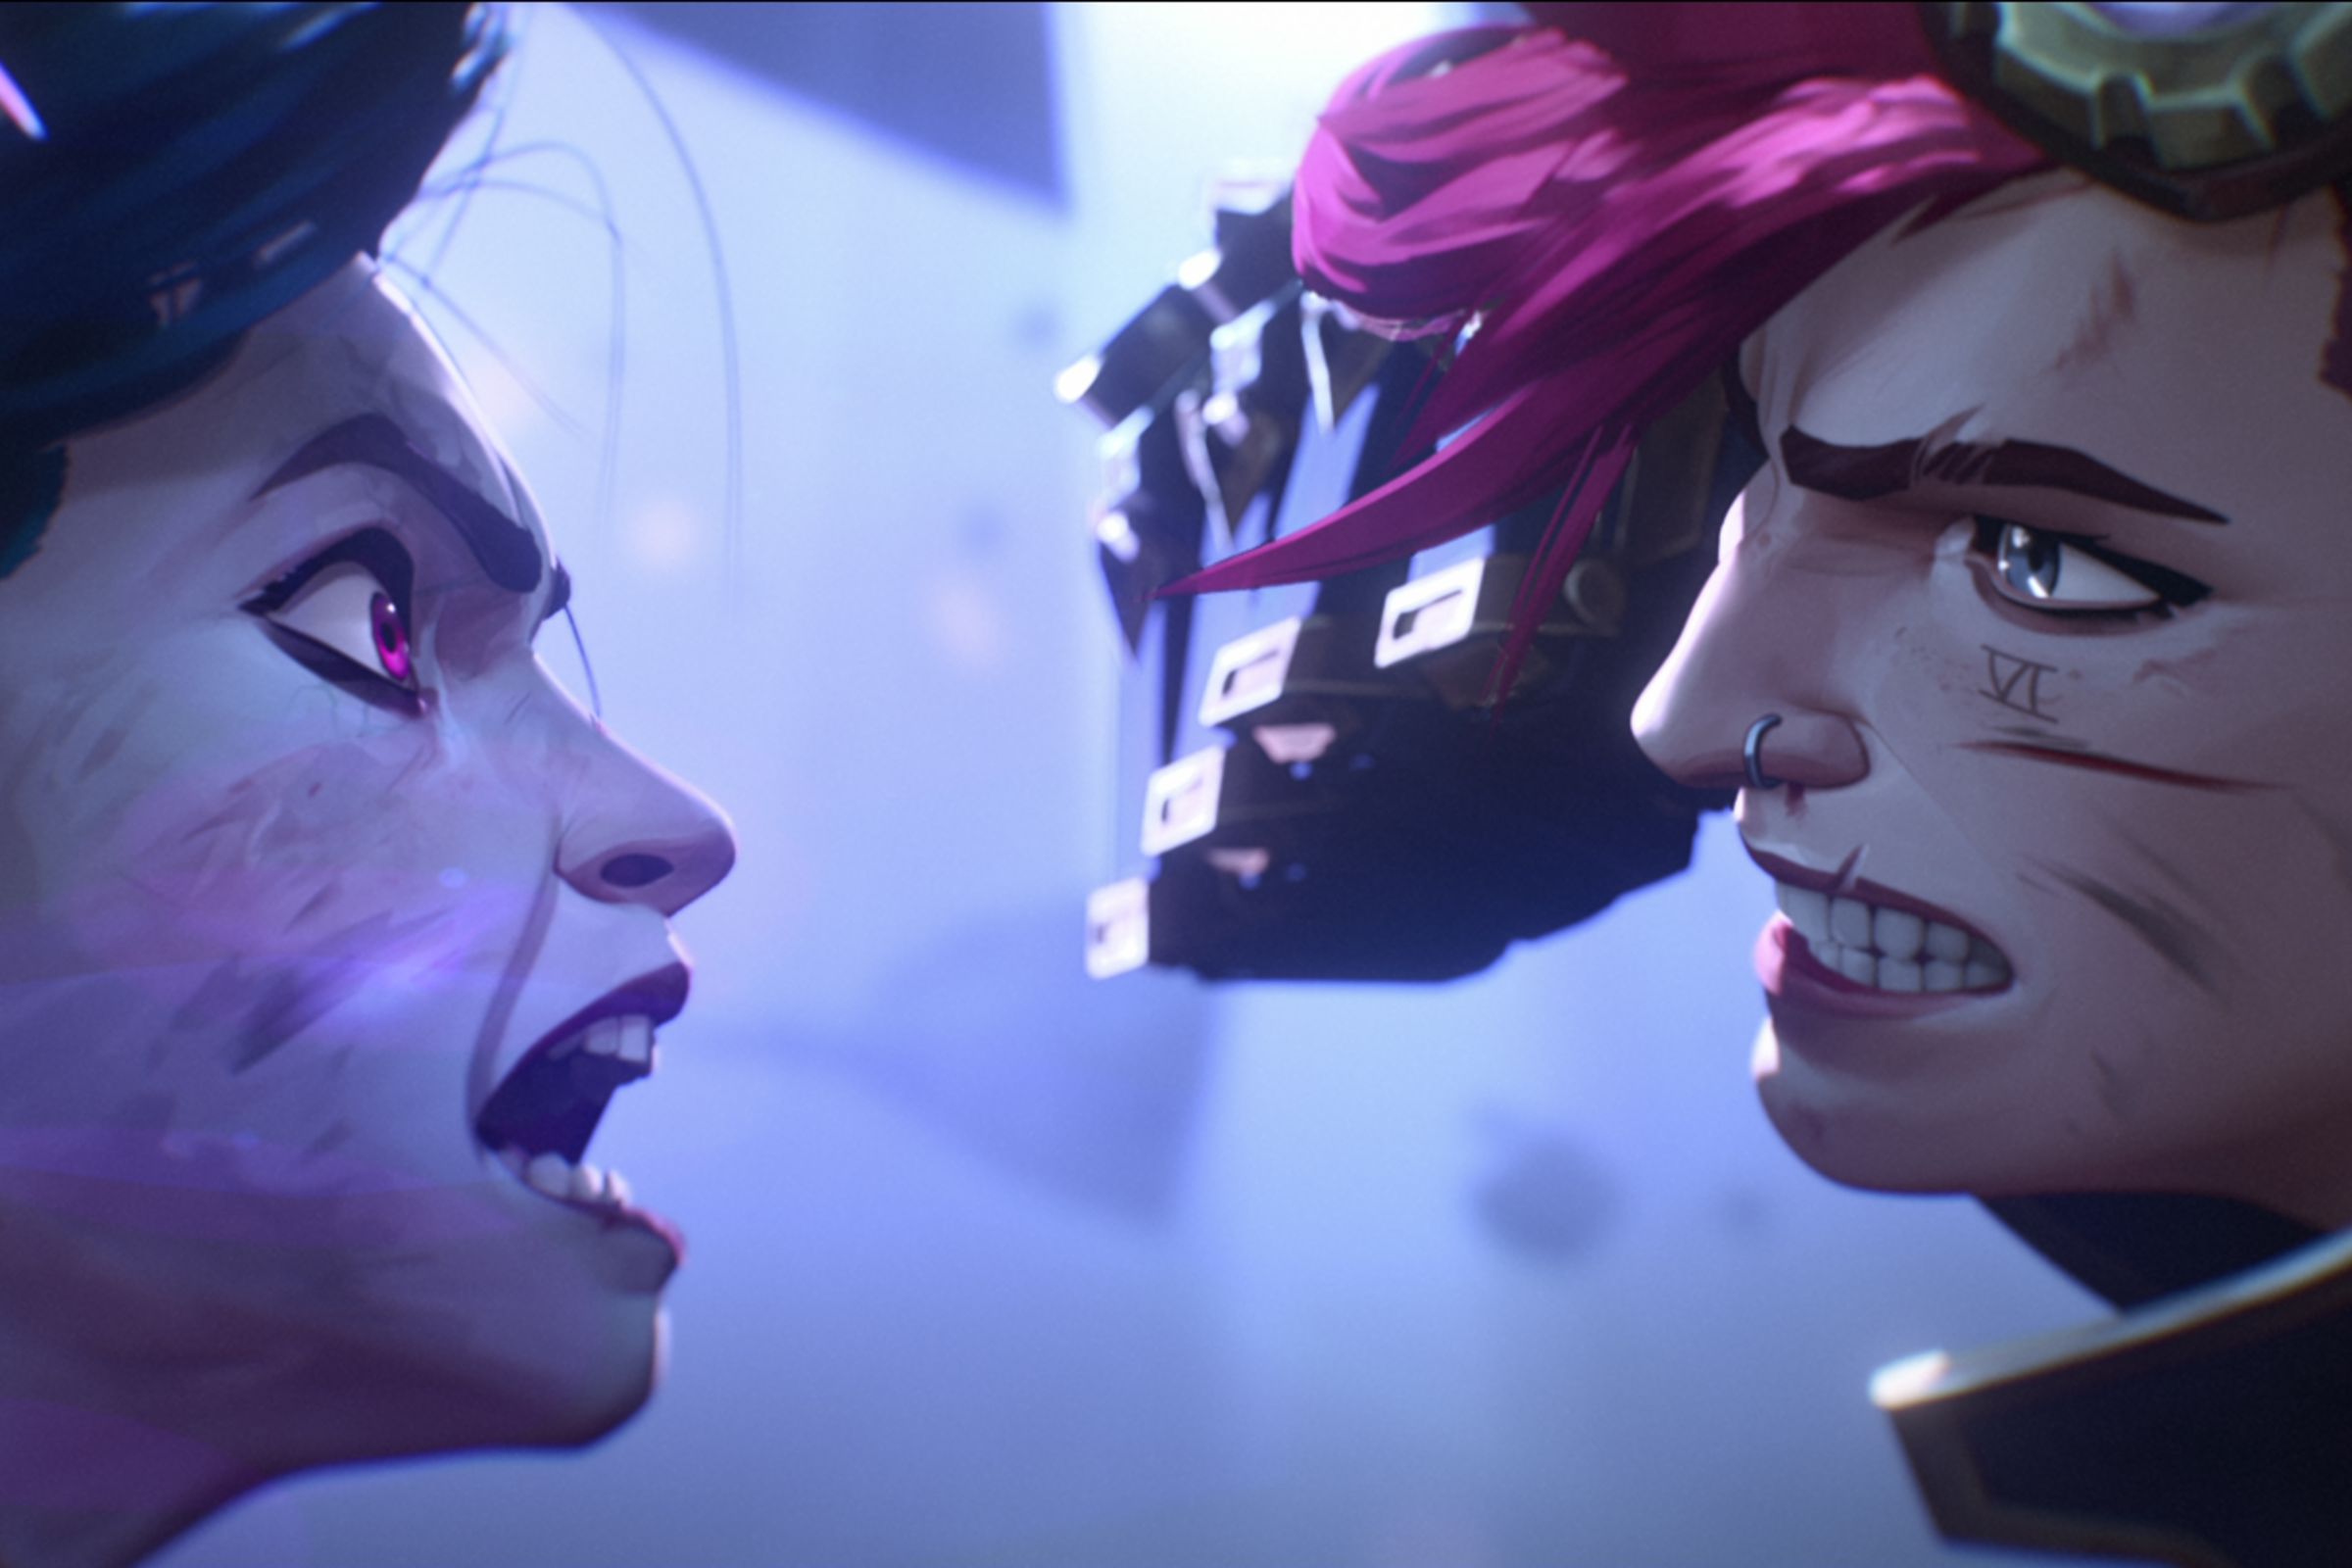 An image showing Jinx and Vi in the second season of Arcane